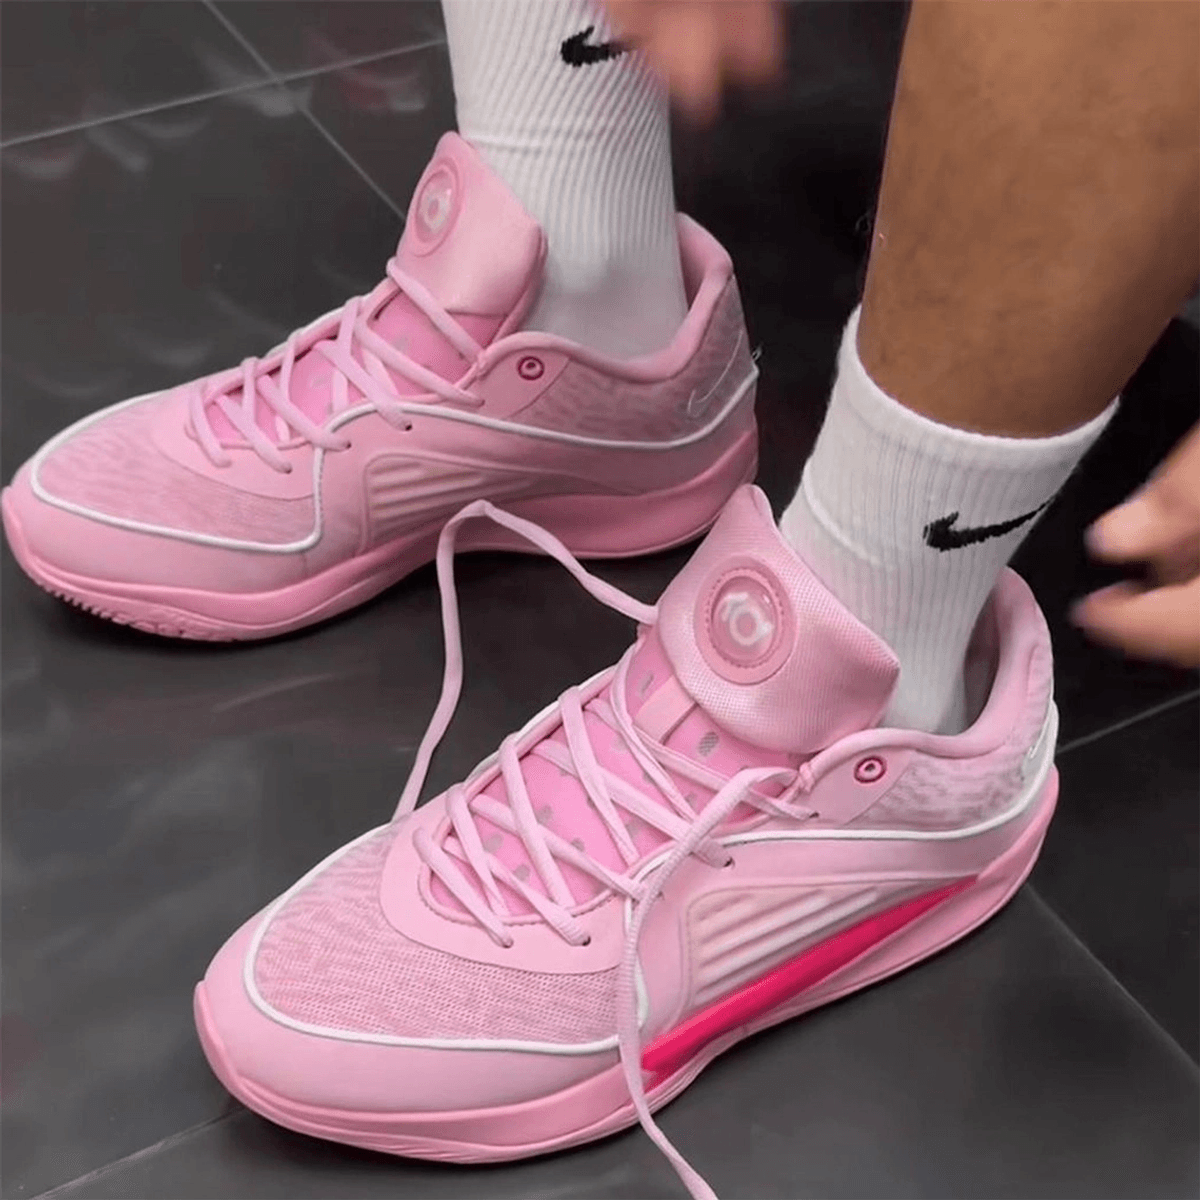 First Look At The Nike KD 16 Aunt Pearl